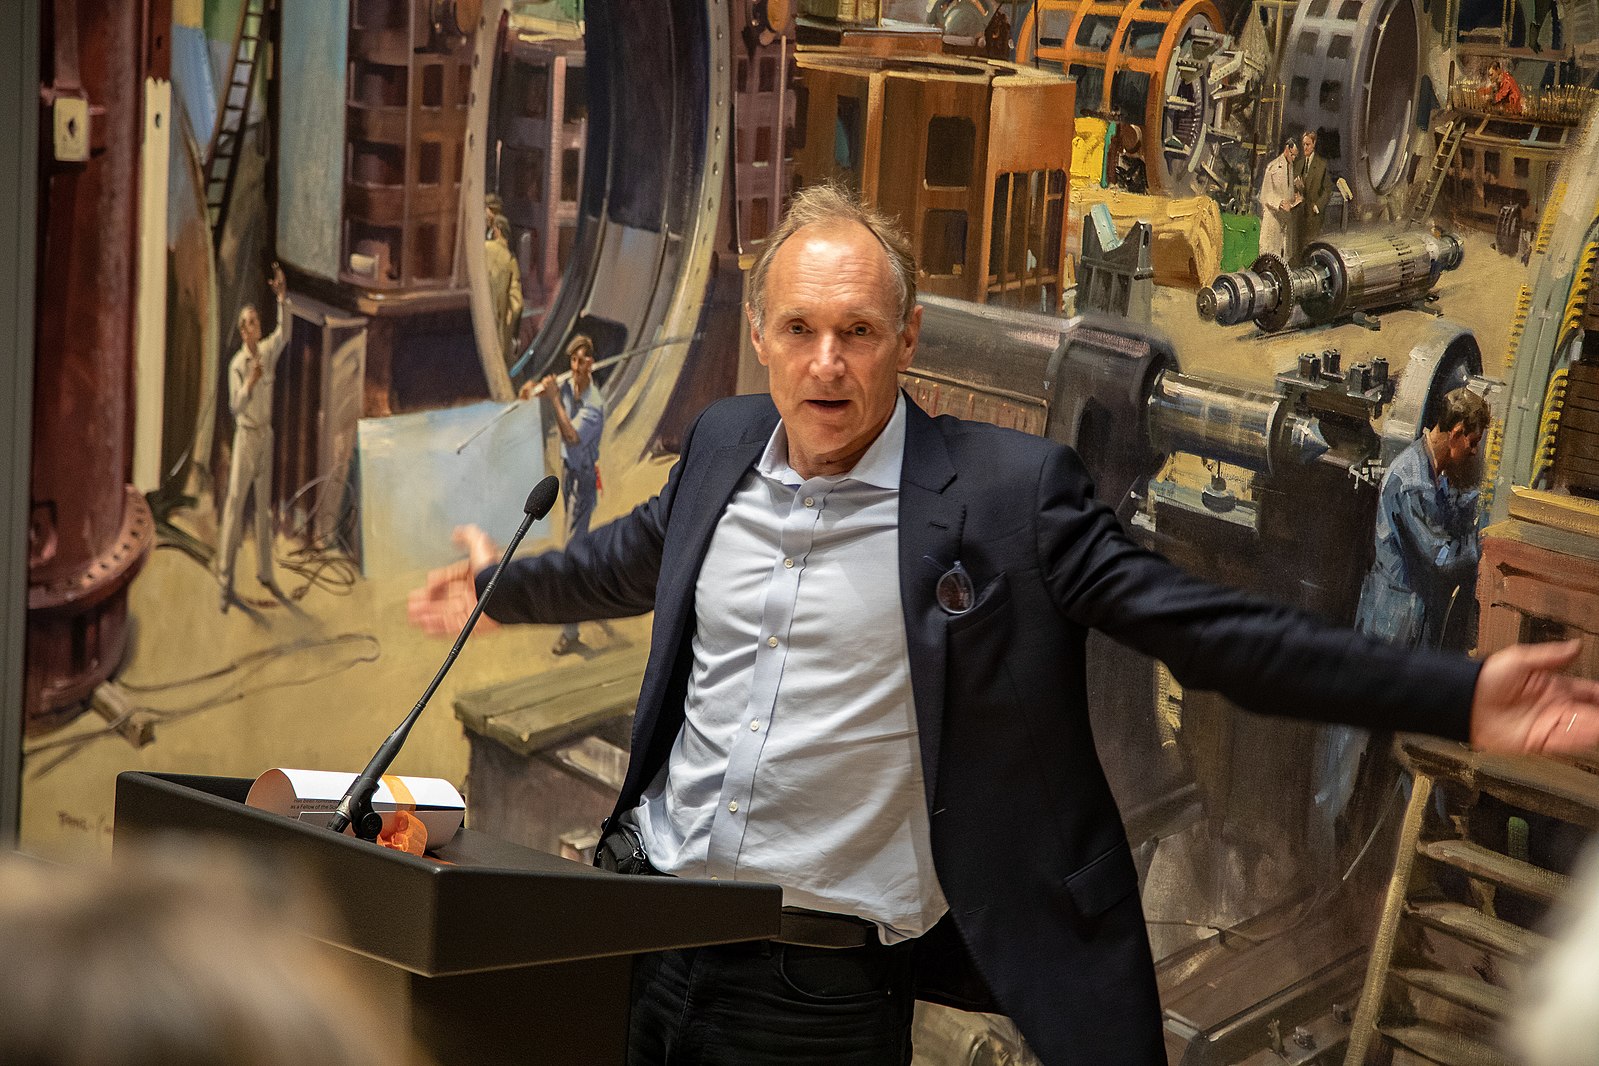 Photo of Tim Berners-Lee Creative Commons JwsLubbock https://upload.wikimedia.org/wikipedia/commons/d/d6/At_the_Science_Museum_for_the_Web%4030_event%2C_March_2019_23.jpg